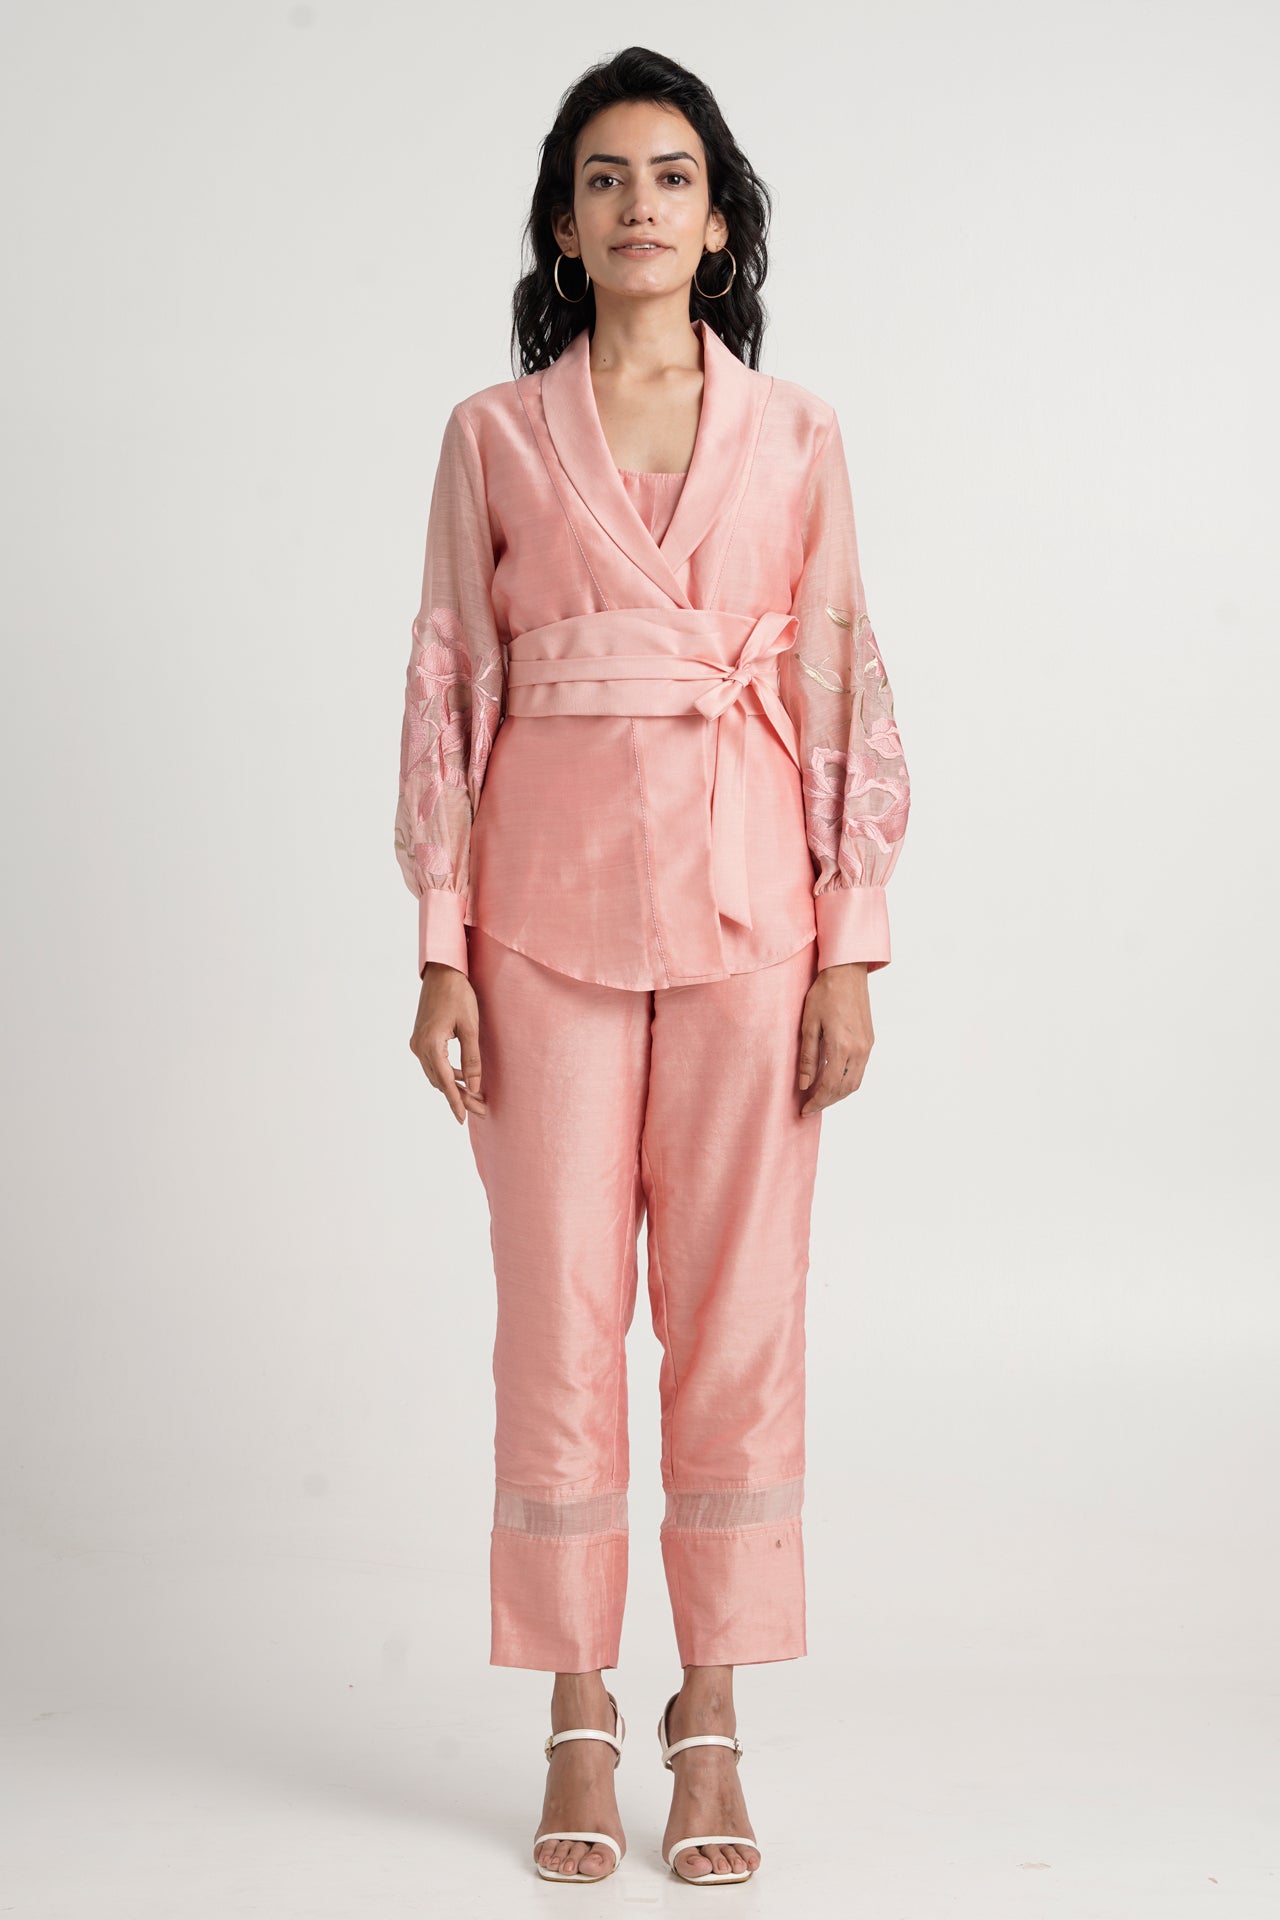 Grace - Old Rose Wrap Top with Ankle Pants